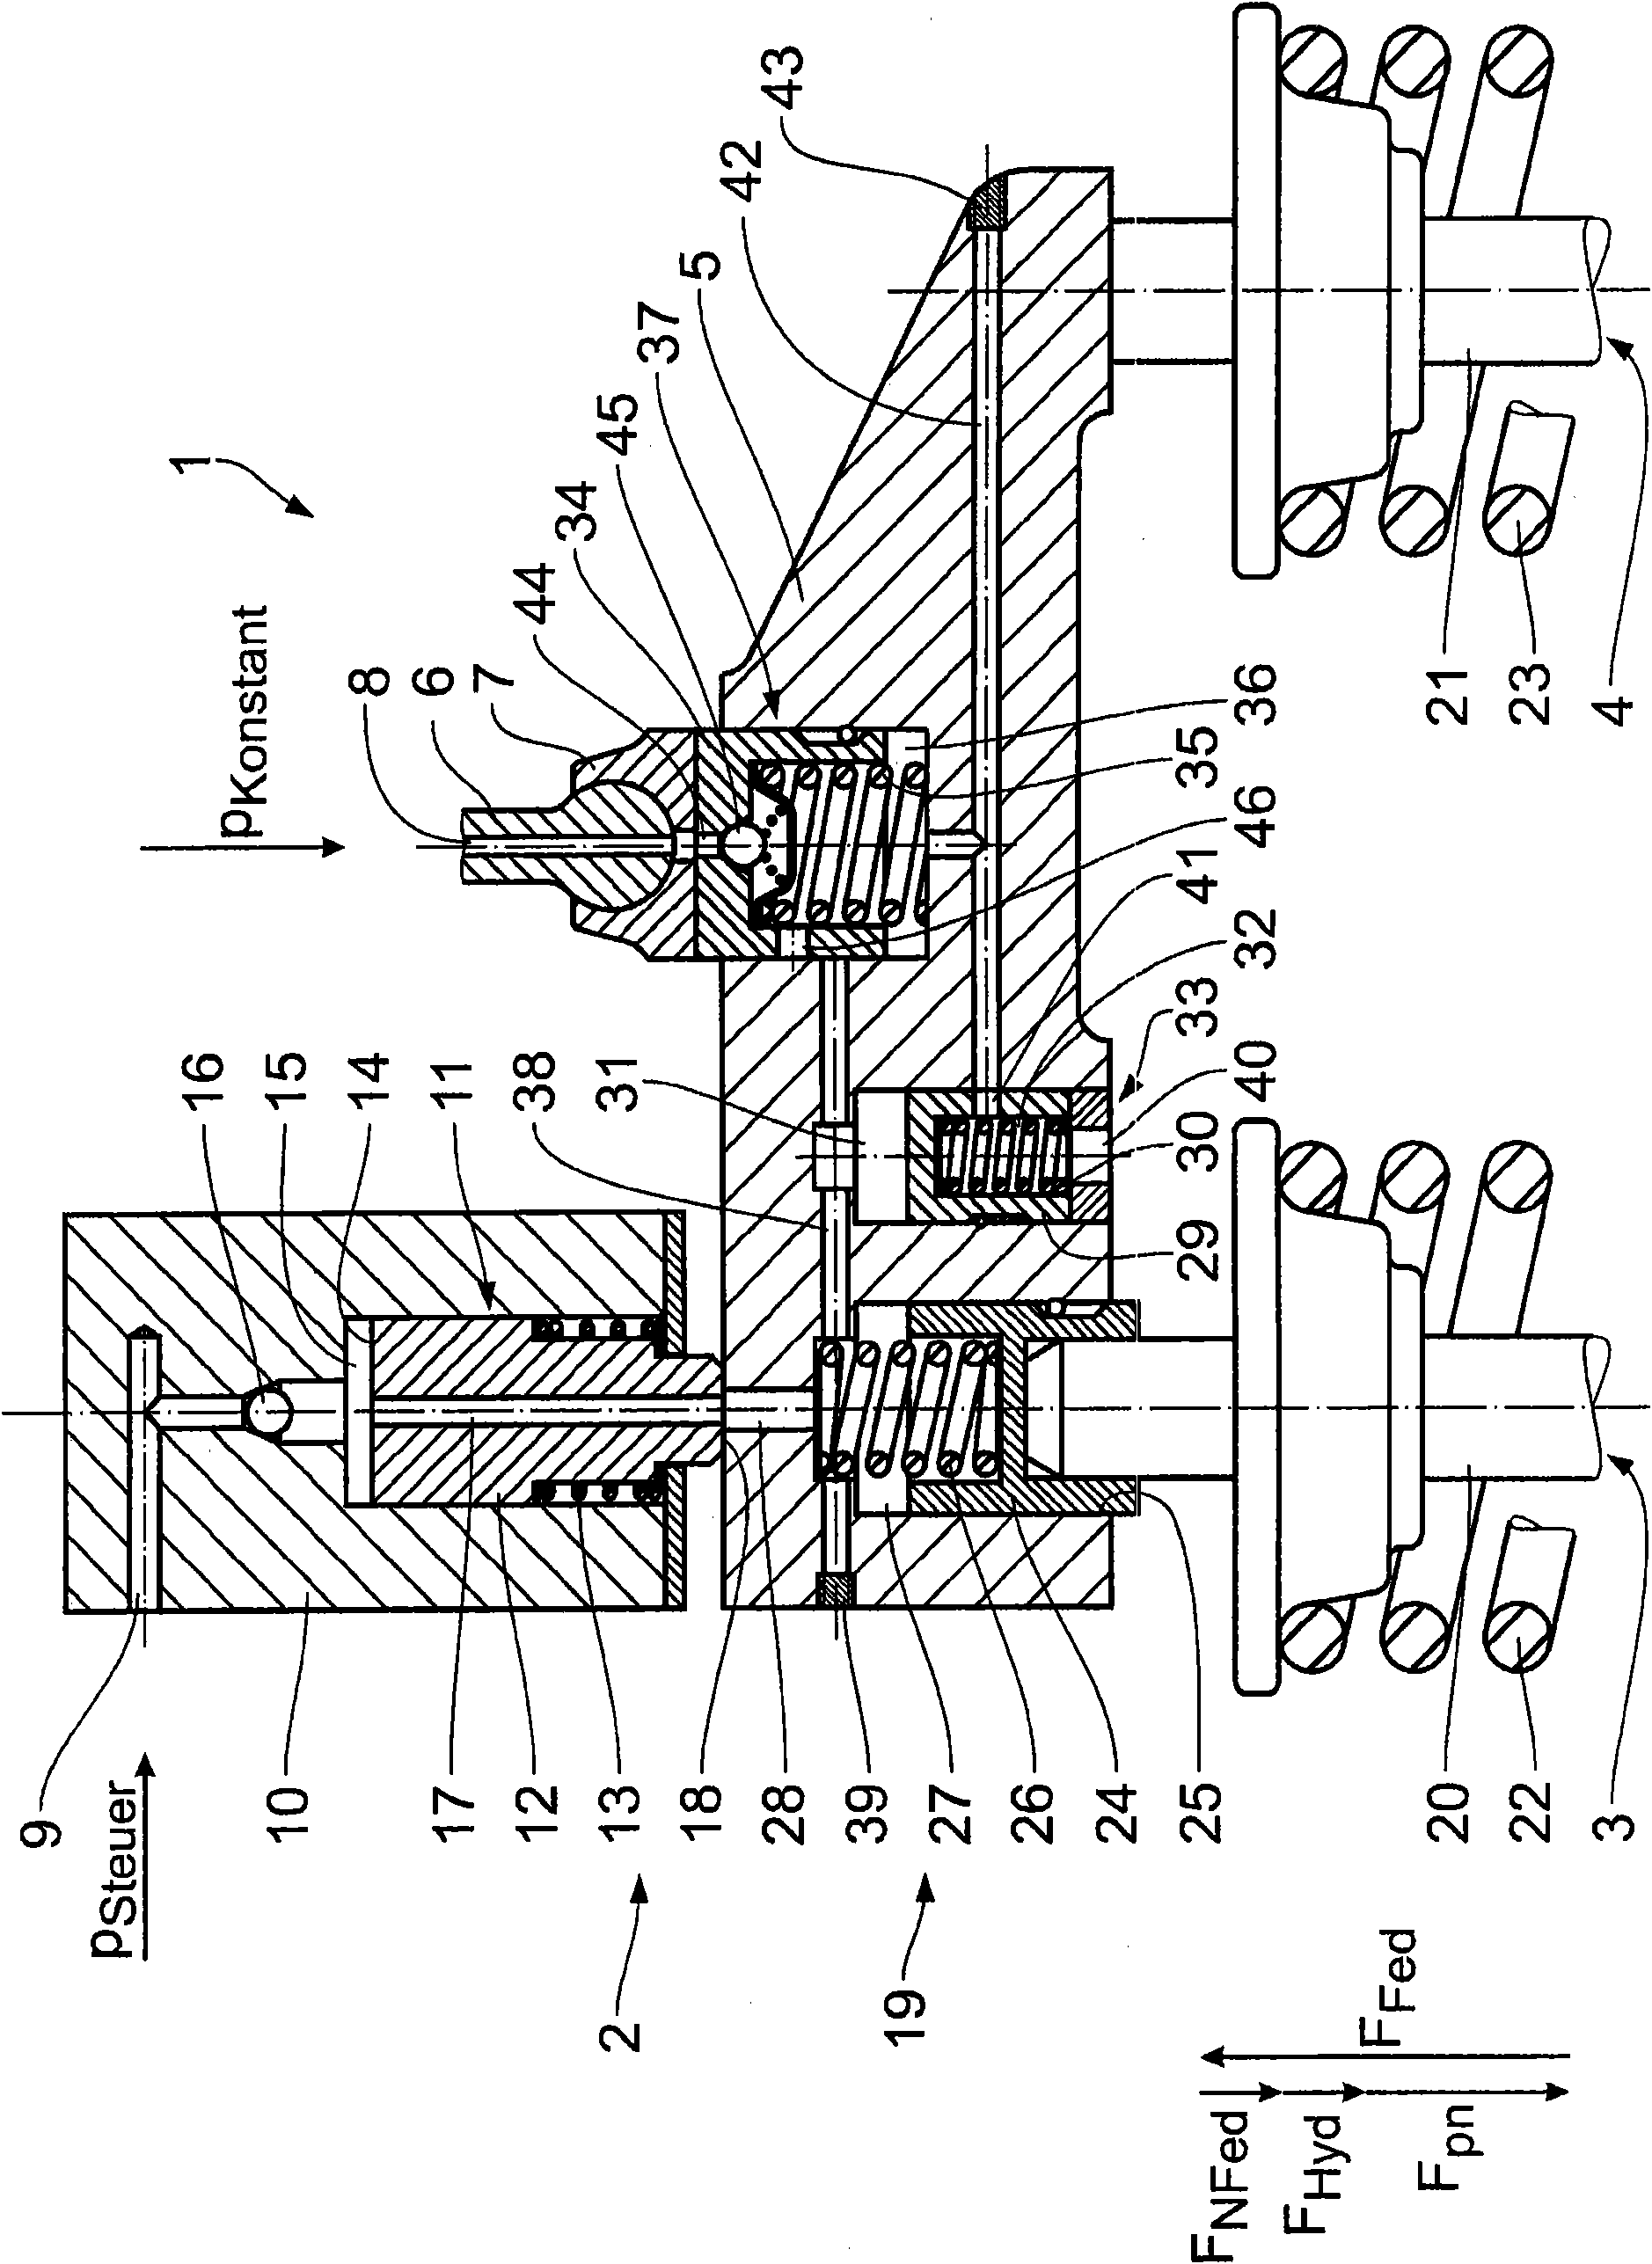 Combustion engine with a motor brake device and a valve lash adjusting mechanism